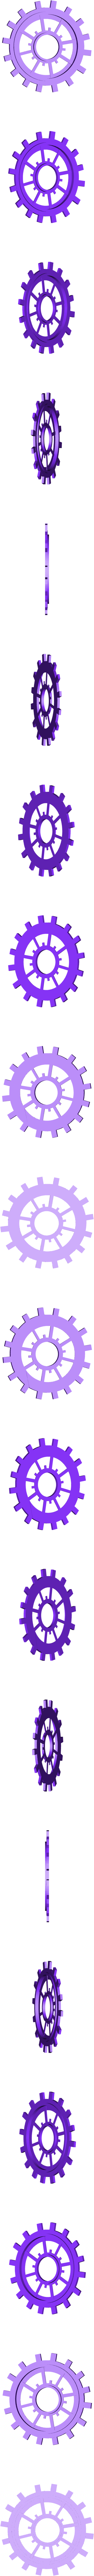 Corrupted Image Purple Distortion PNG